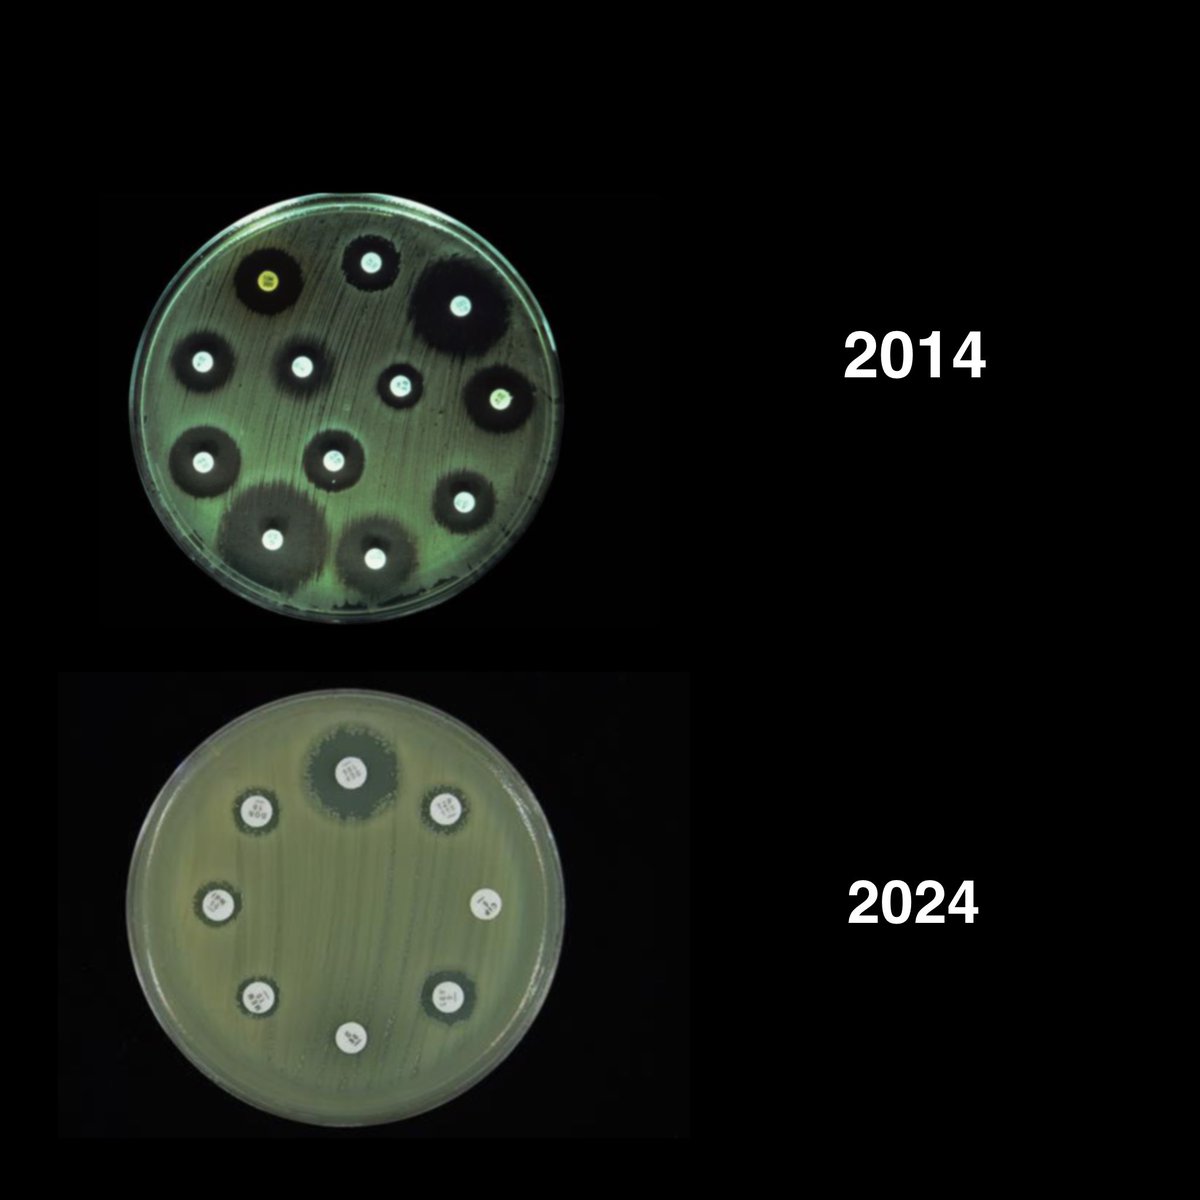 The challenge we don’t have to contribute to… 

Use antibiotics appropriately…

#10yearchallenge